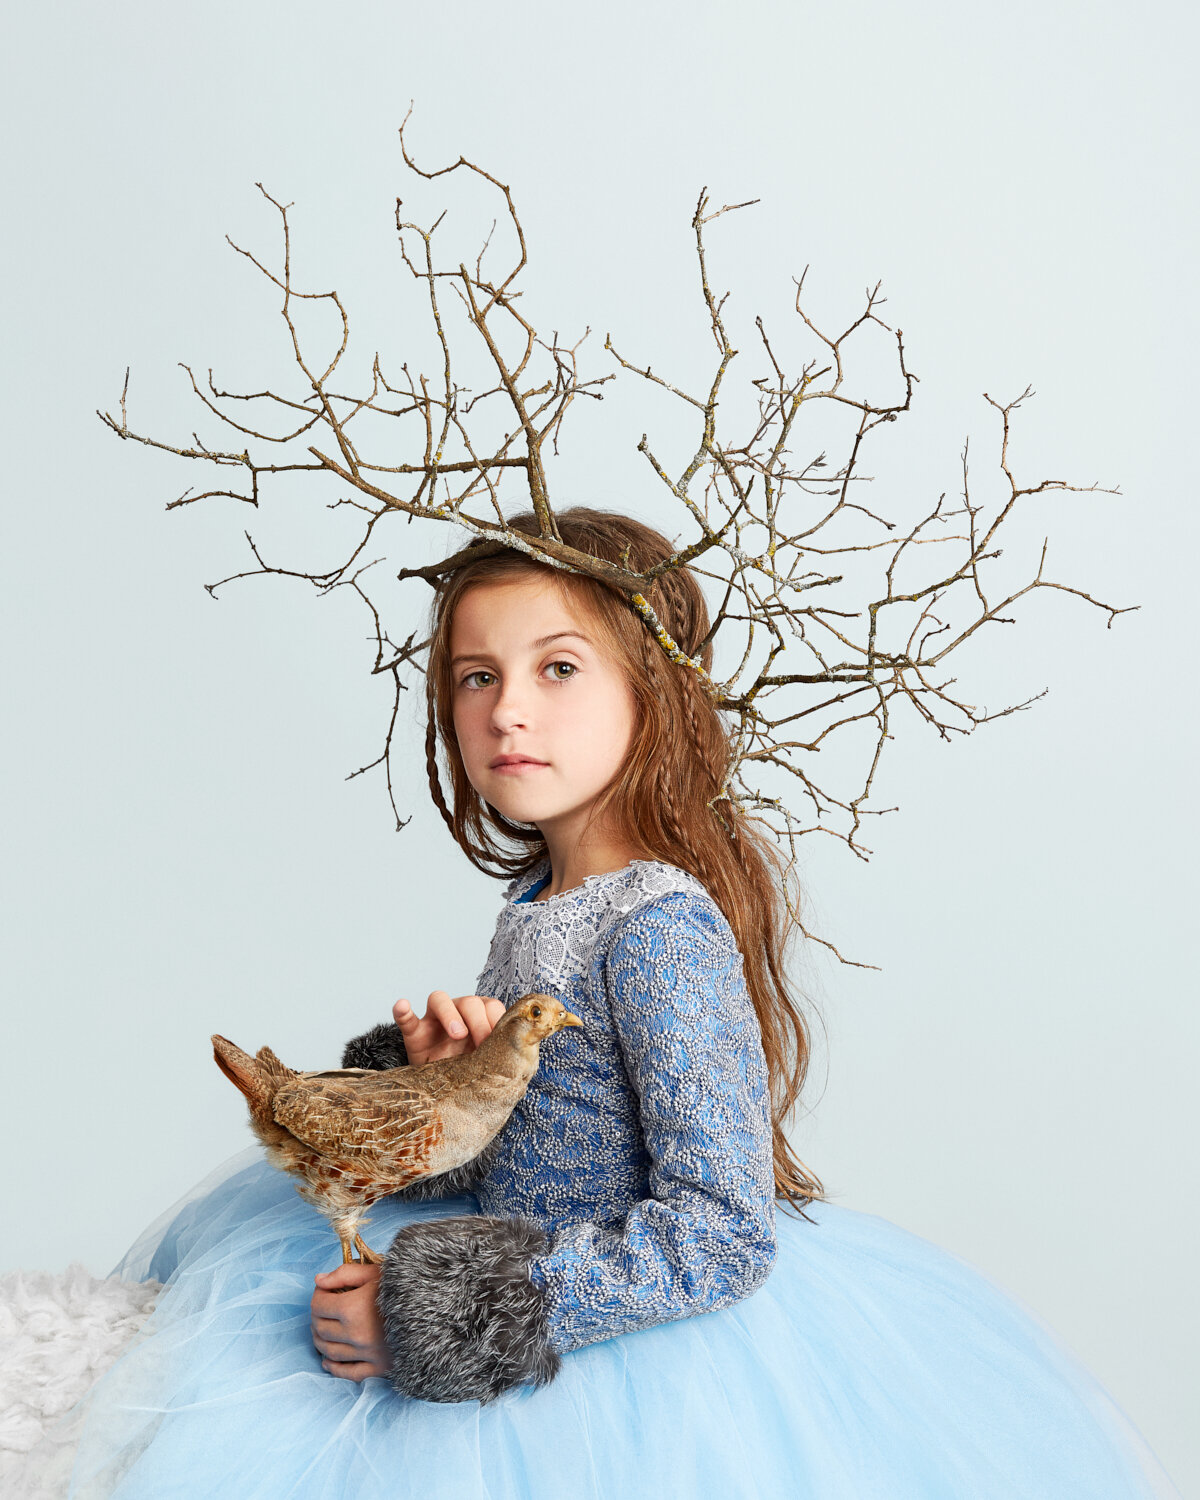 whimsical portrait of little girl with twig crown, beaded blue dress and brown bird by portrait photographer Hanna Agar